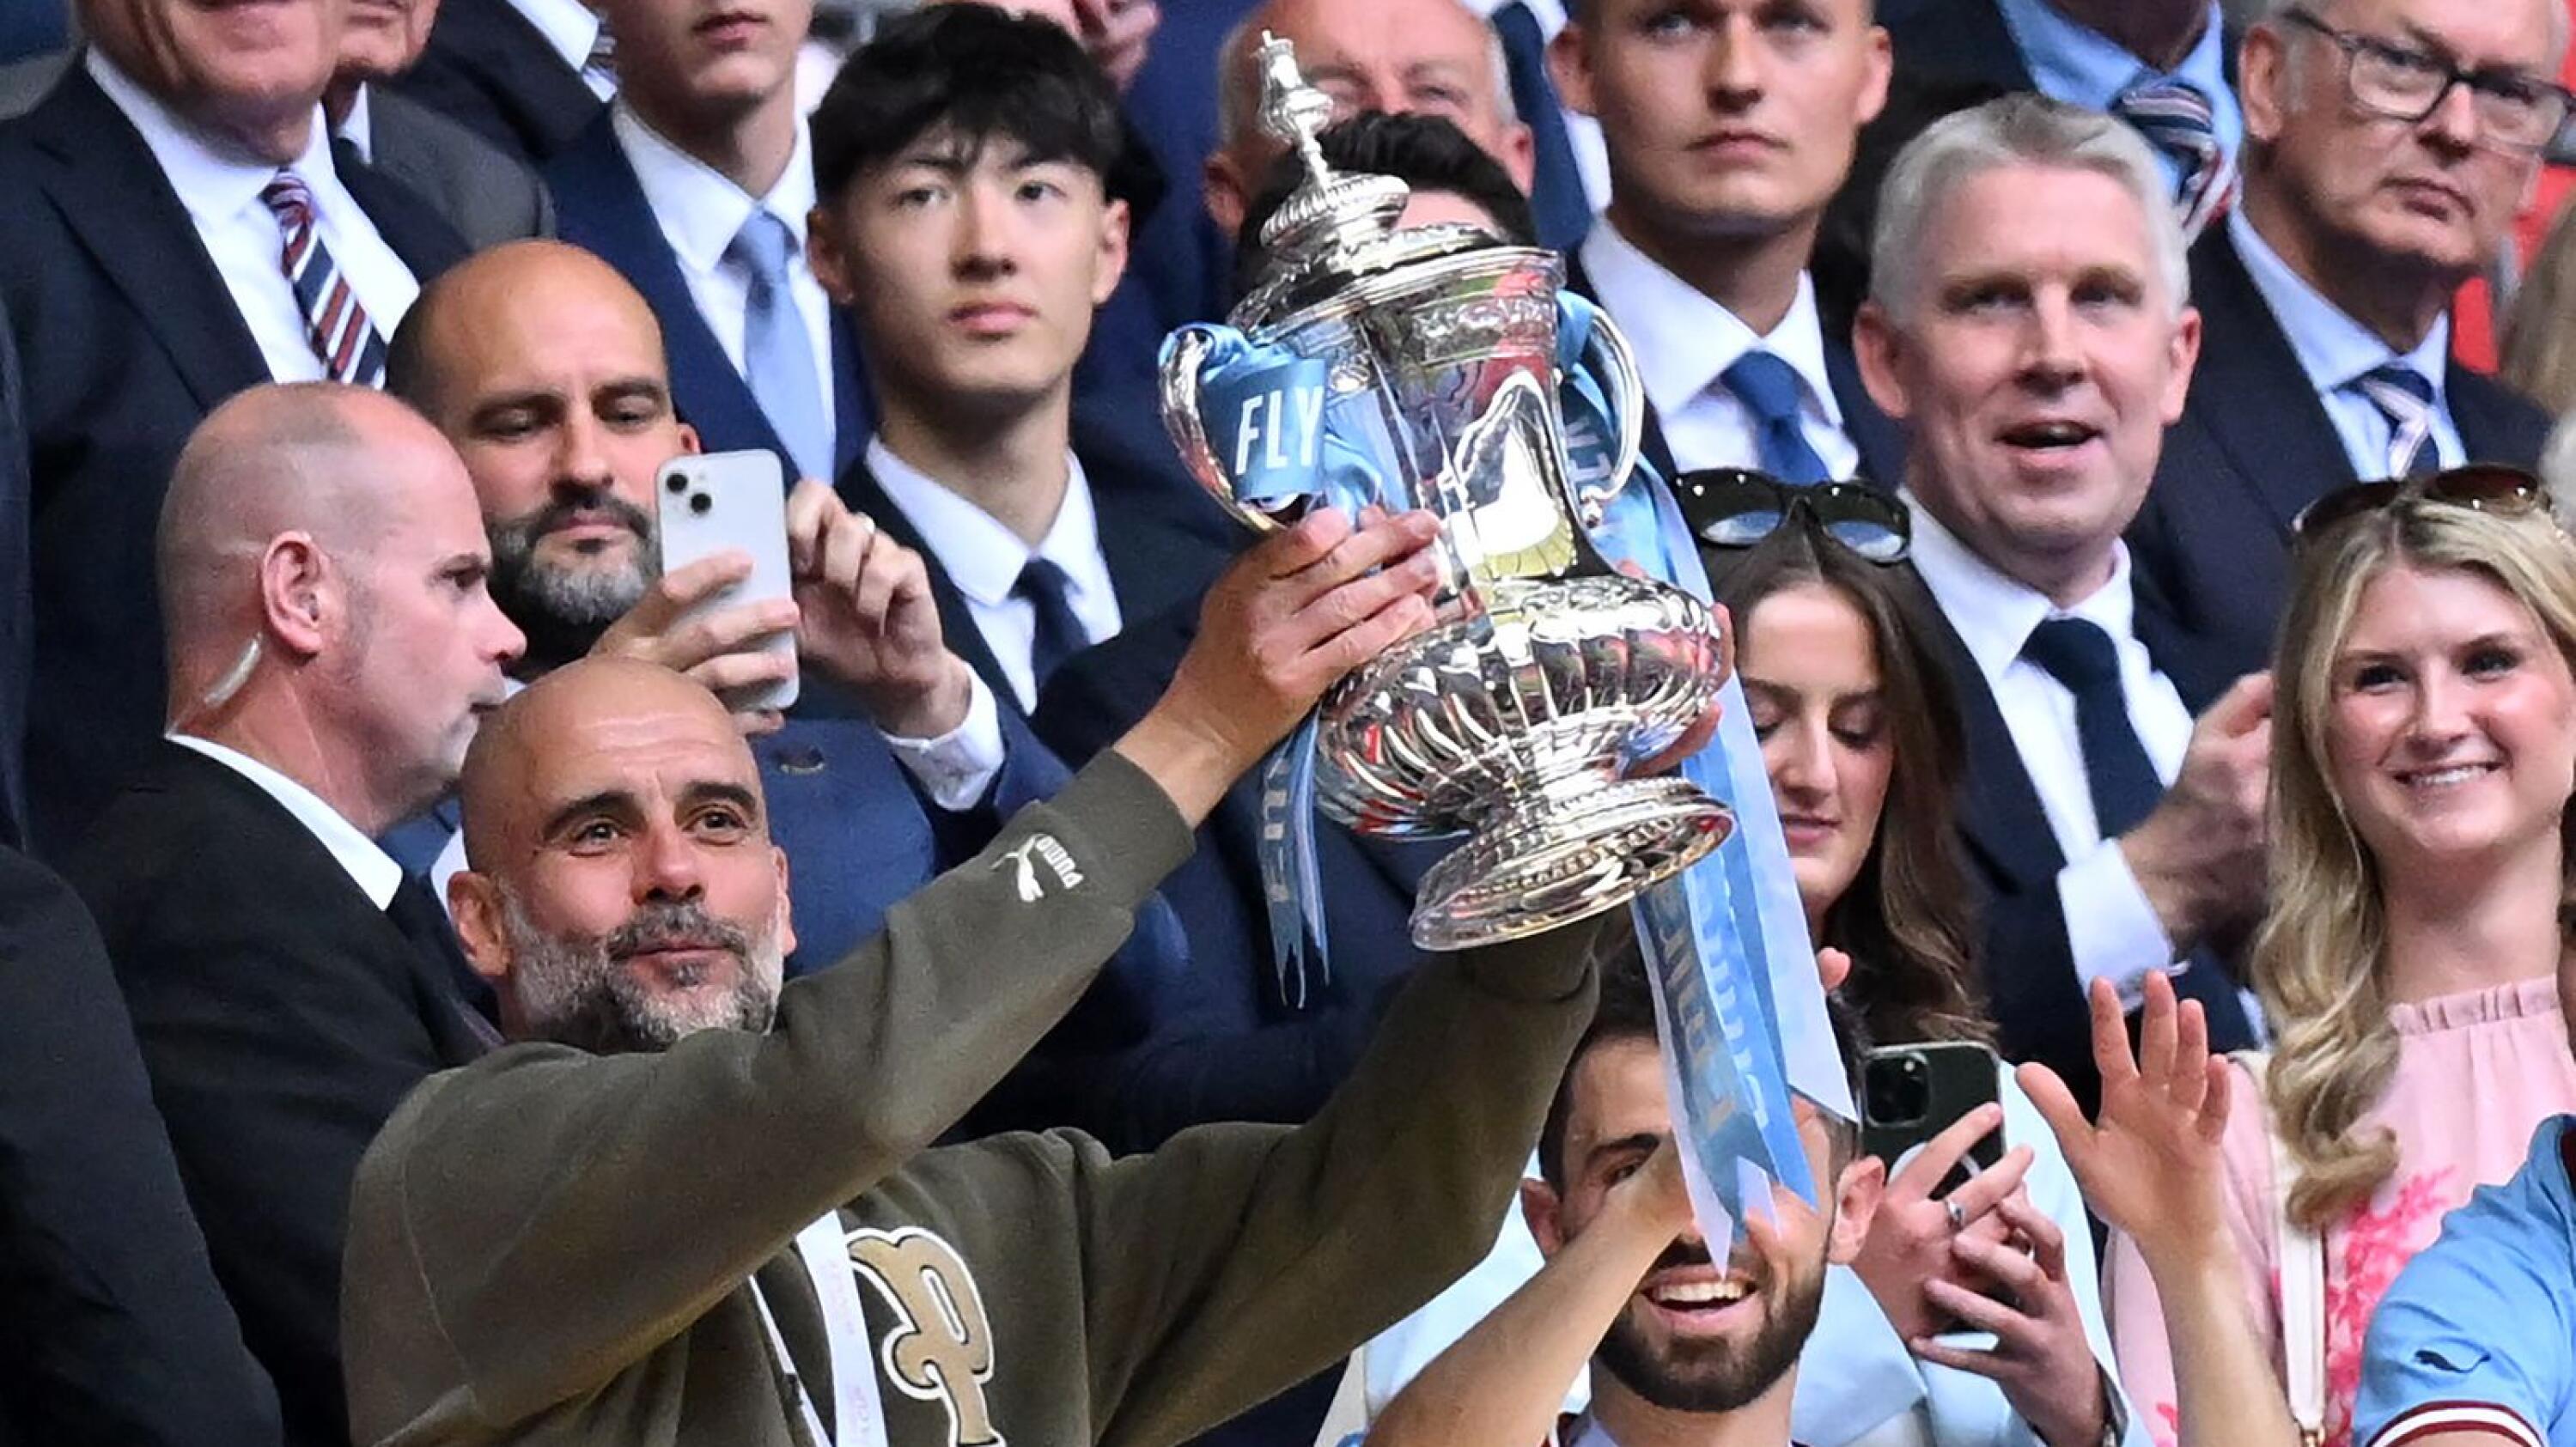 Manchester City manager Pep Guardiola holds up the trophy after they beat Manchester United in Saturday’s FA Cup final at Wembley Stadium